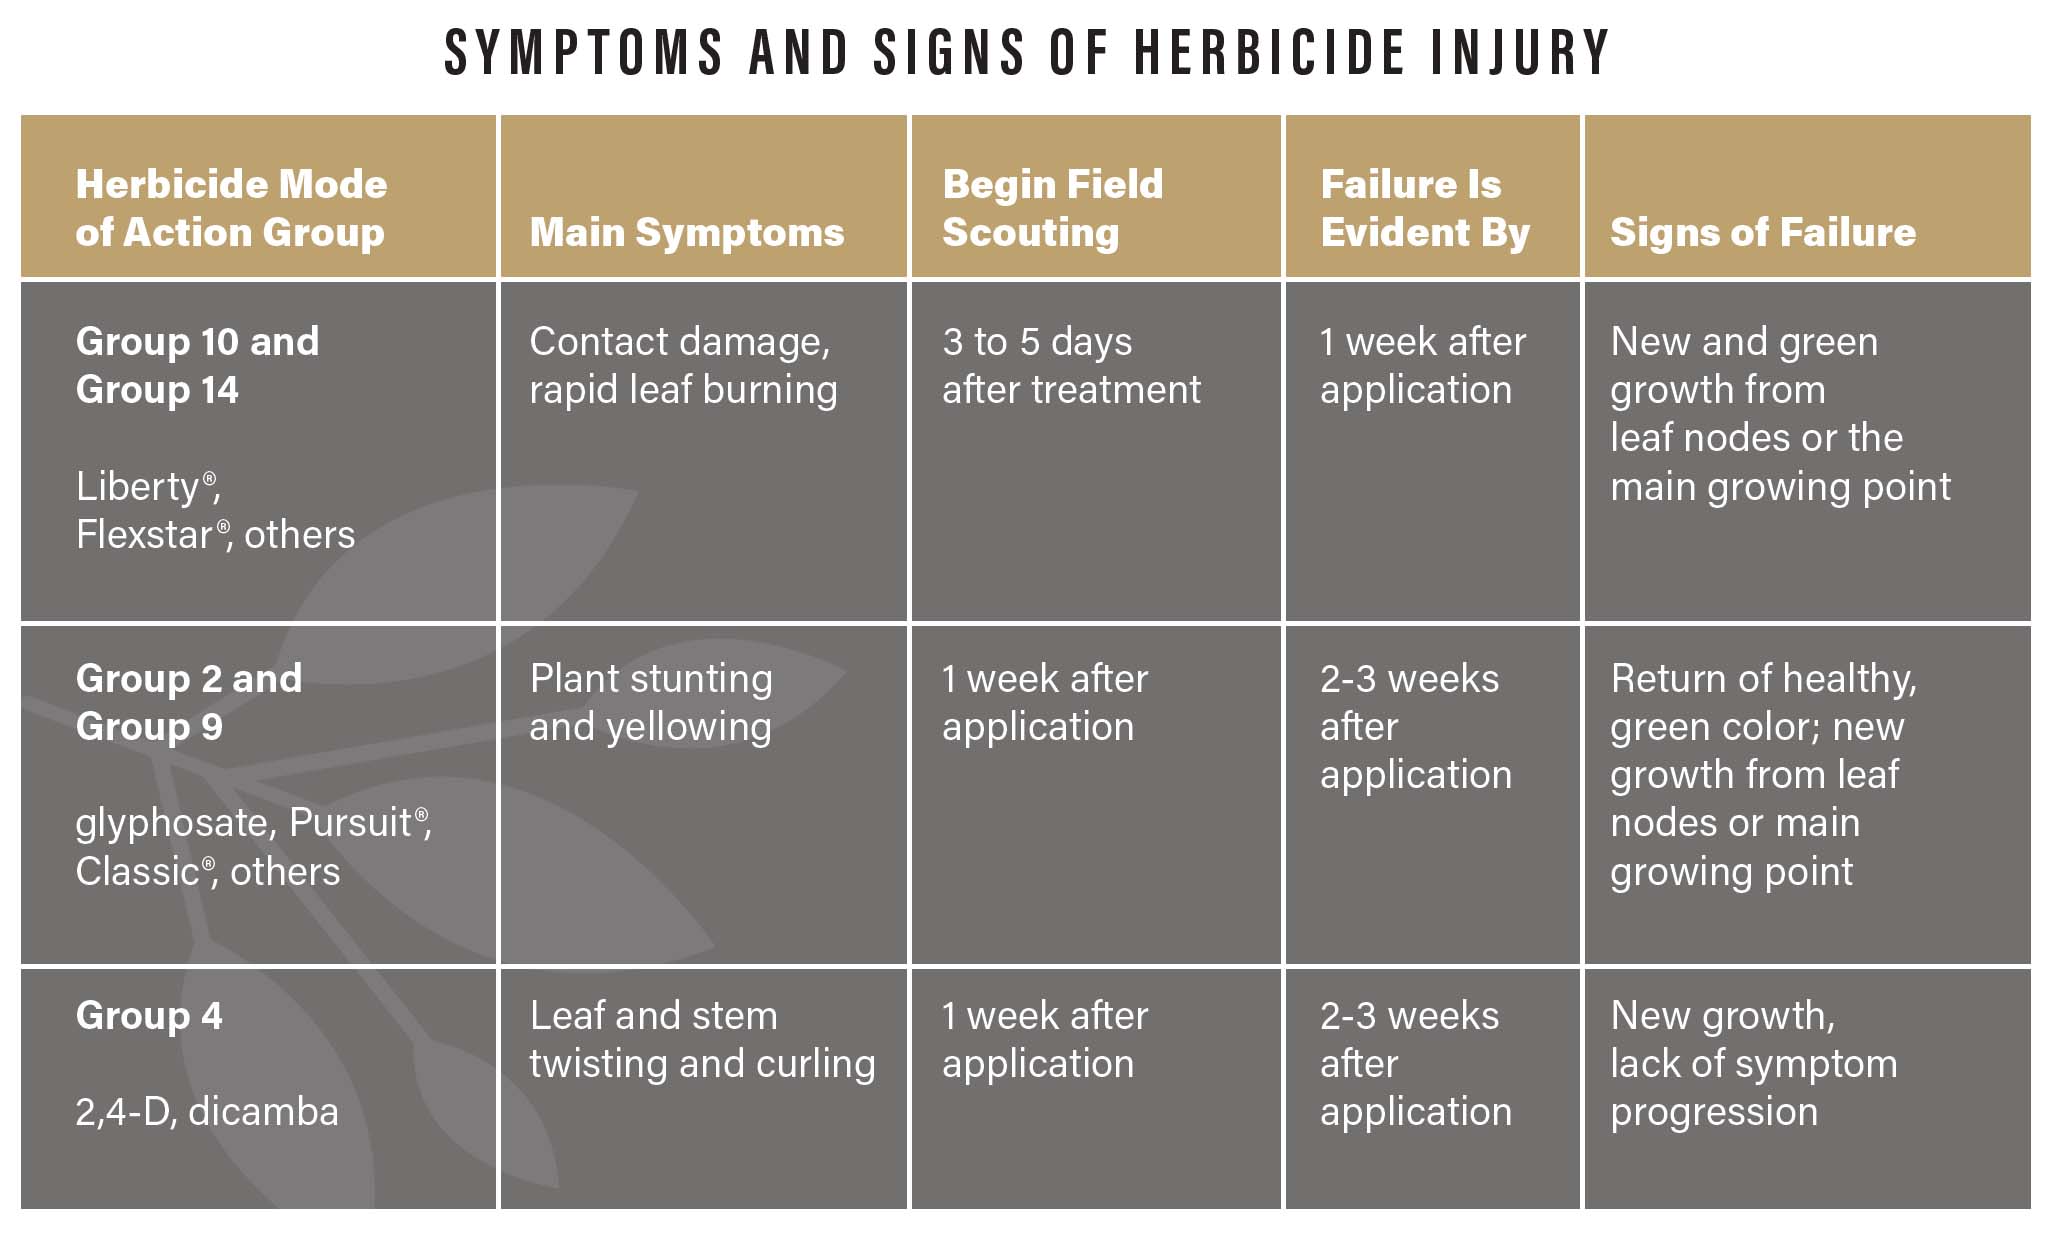 symptoms and signs chart